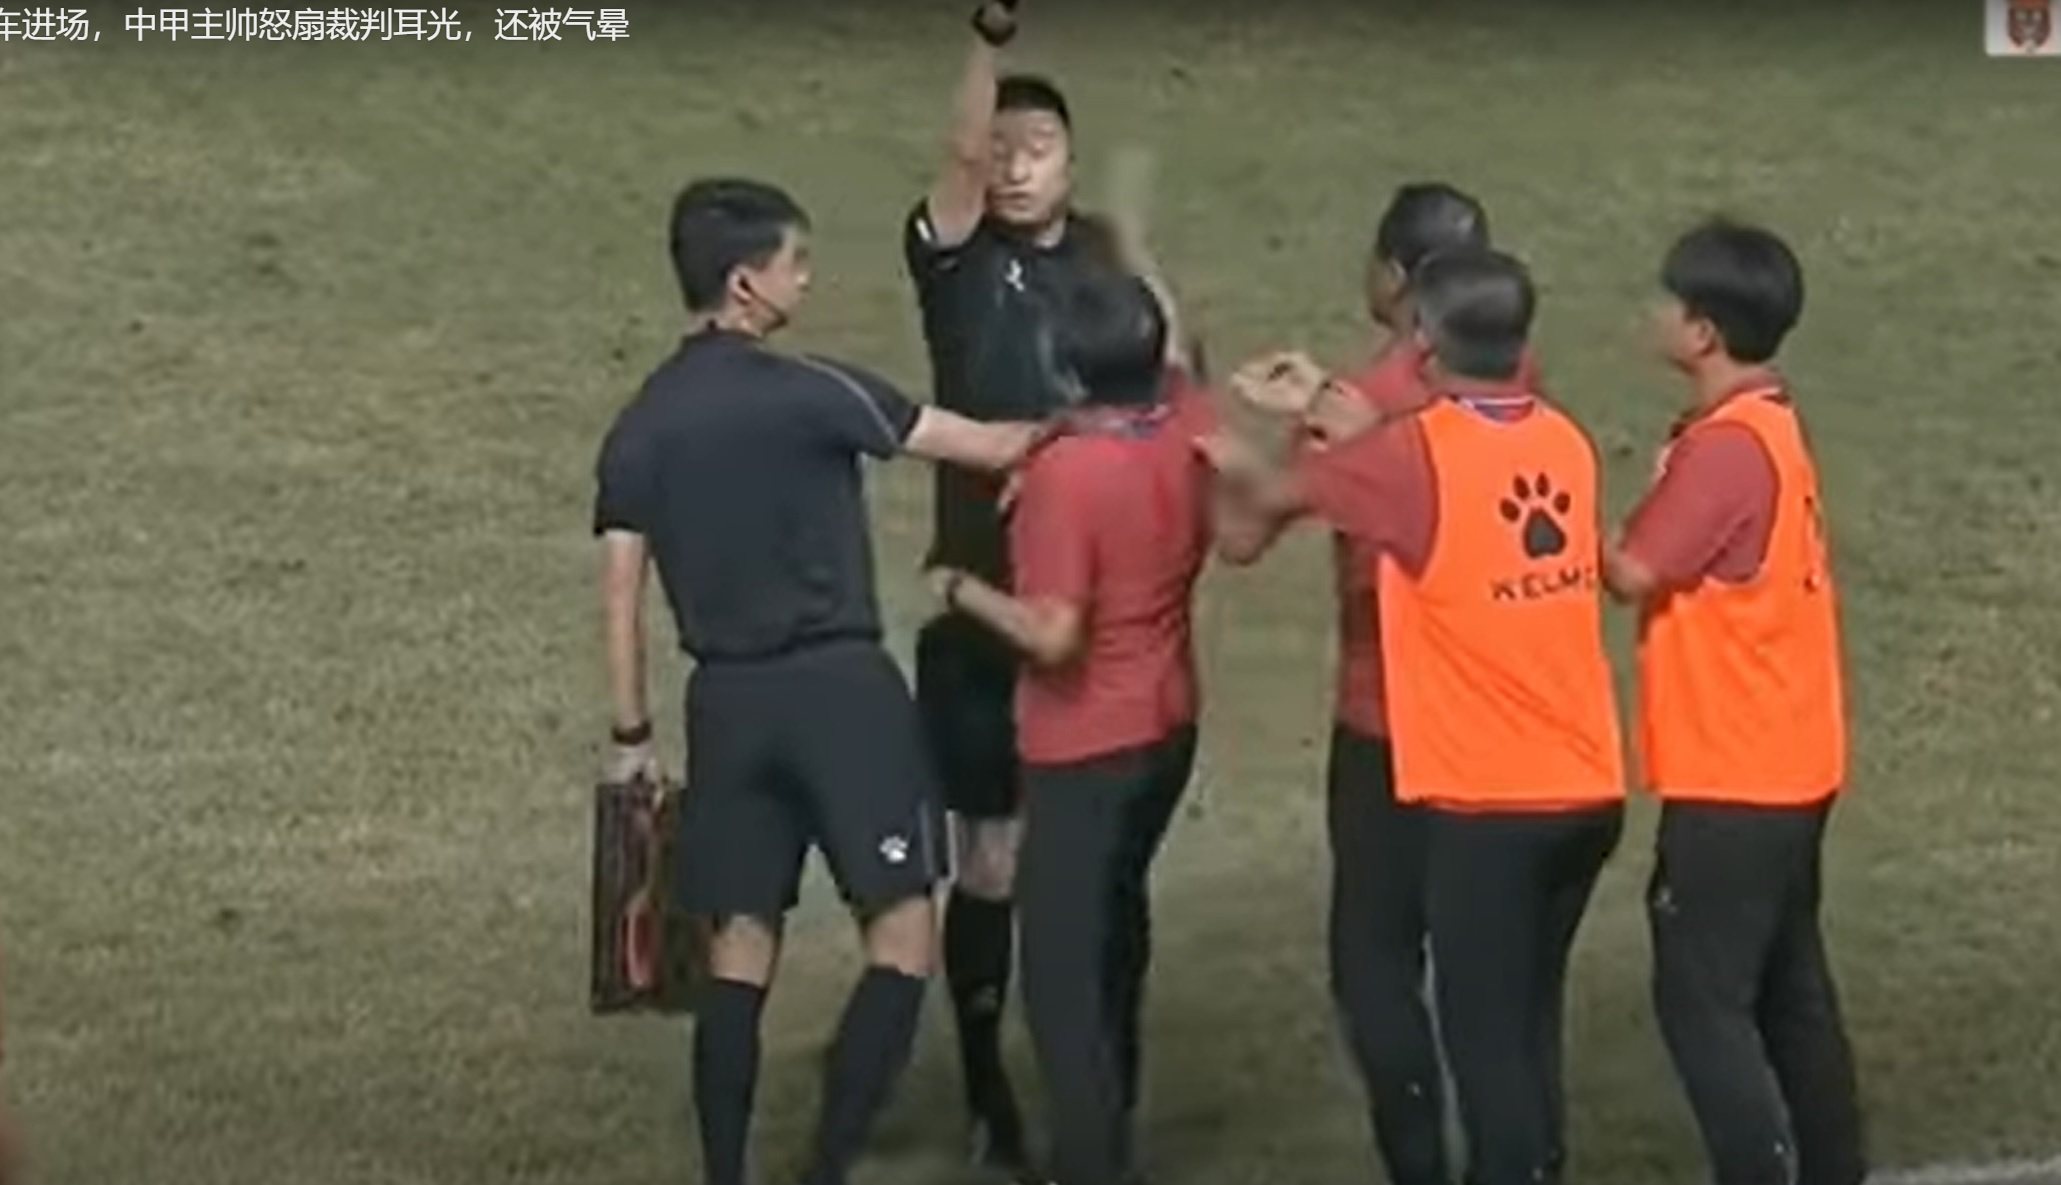 A screen grab from a YouTube video shows team leader Duan Xin about to slap the referee. Photo: YouTube